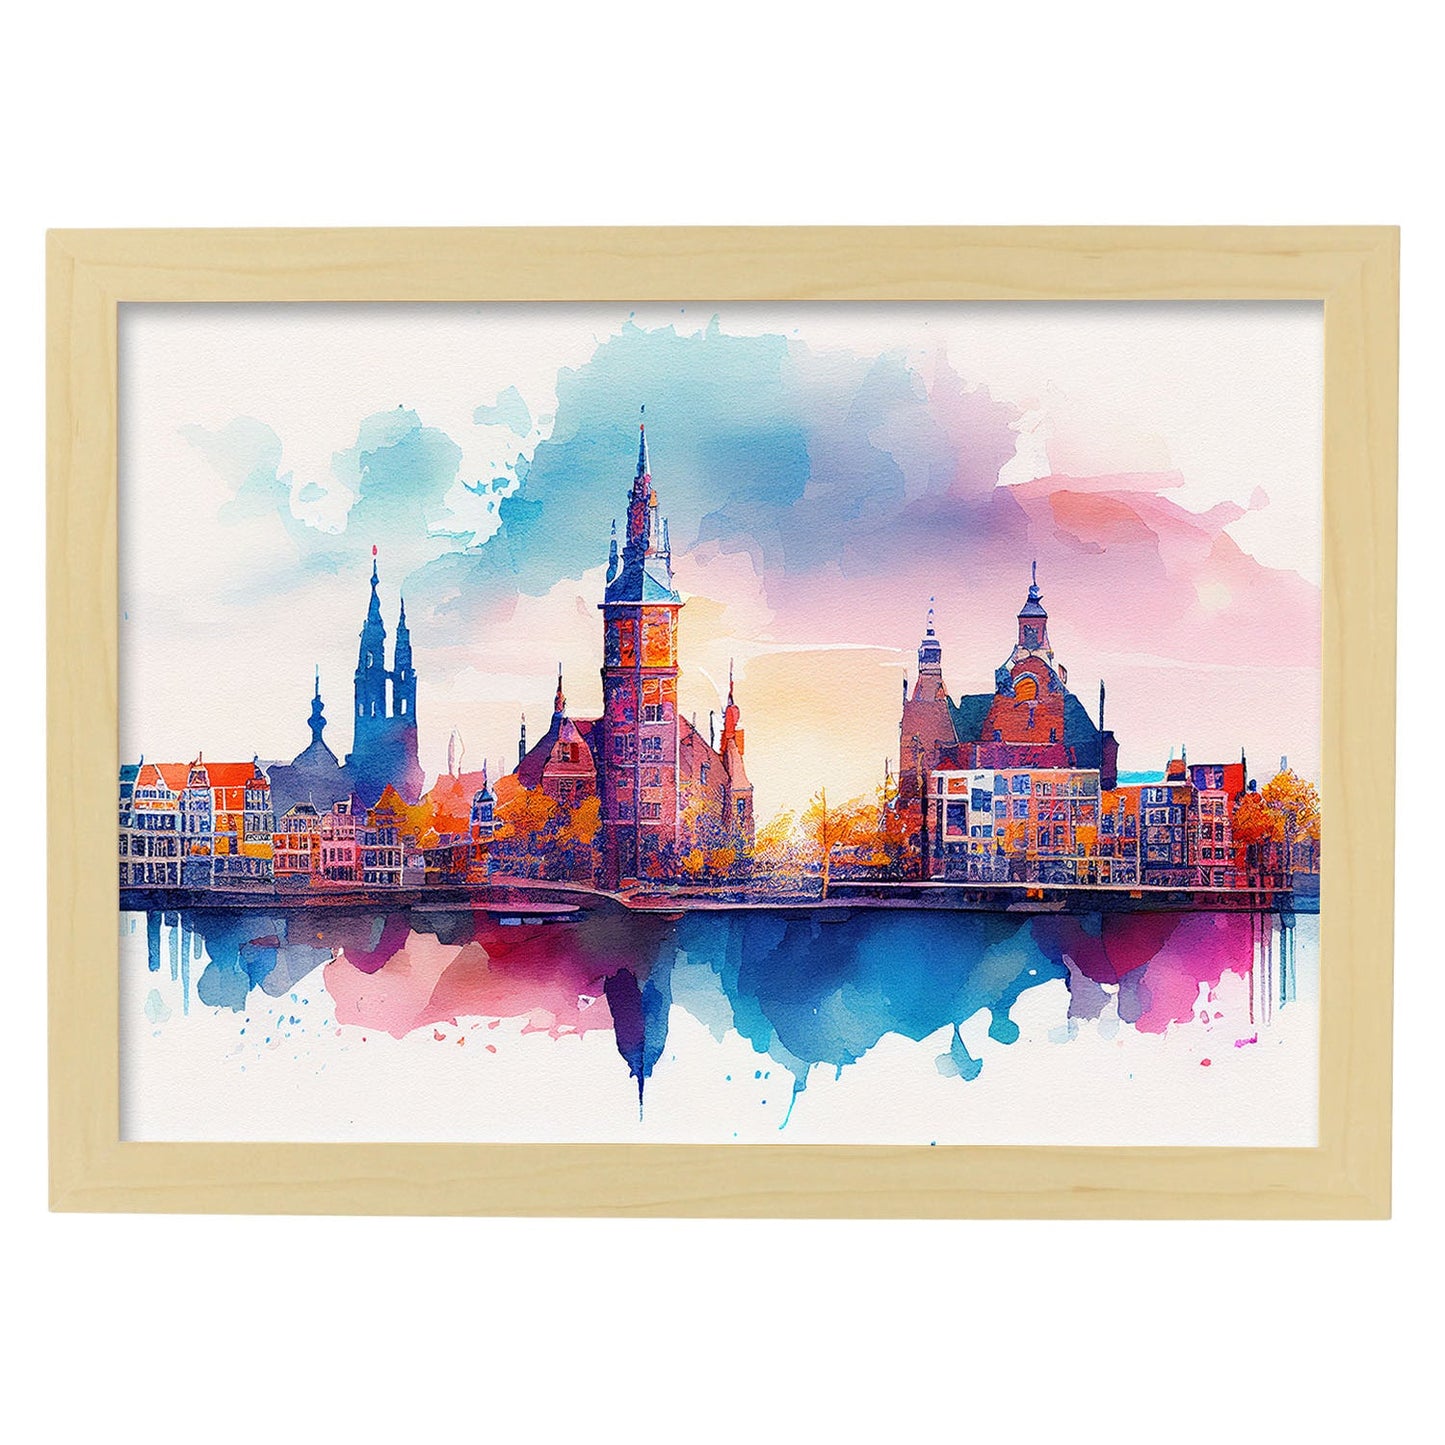 Nacnic watercolor of a skyline of the city of Amsterdam_3. Aesthetic Wall Art Prints for Bedroom or Living Room Design.-Artwork-Nacnic-A4-Marco Madera Clara-Nacnic Estudio SL